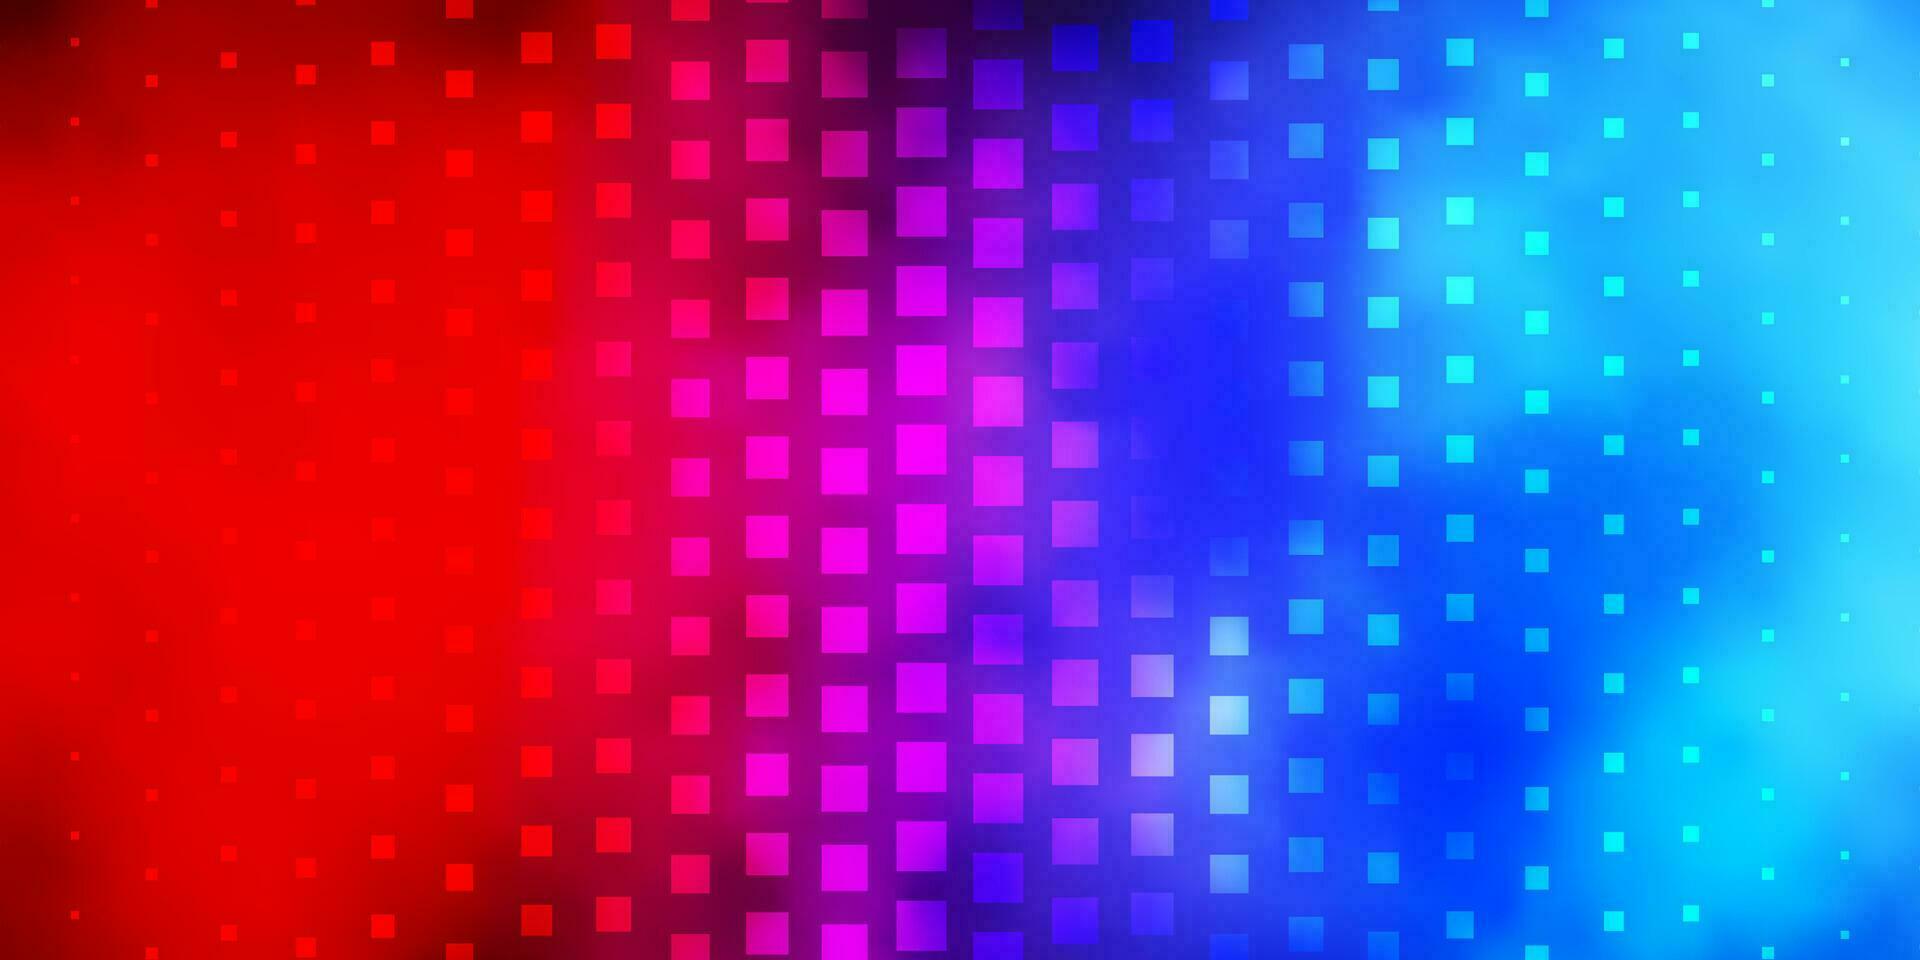 Light Blue, Red vector background with rectangles.